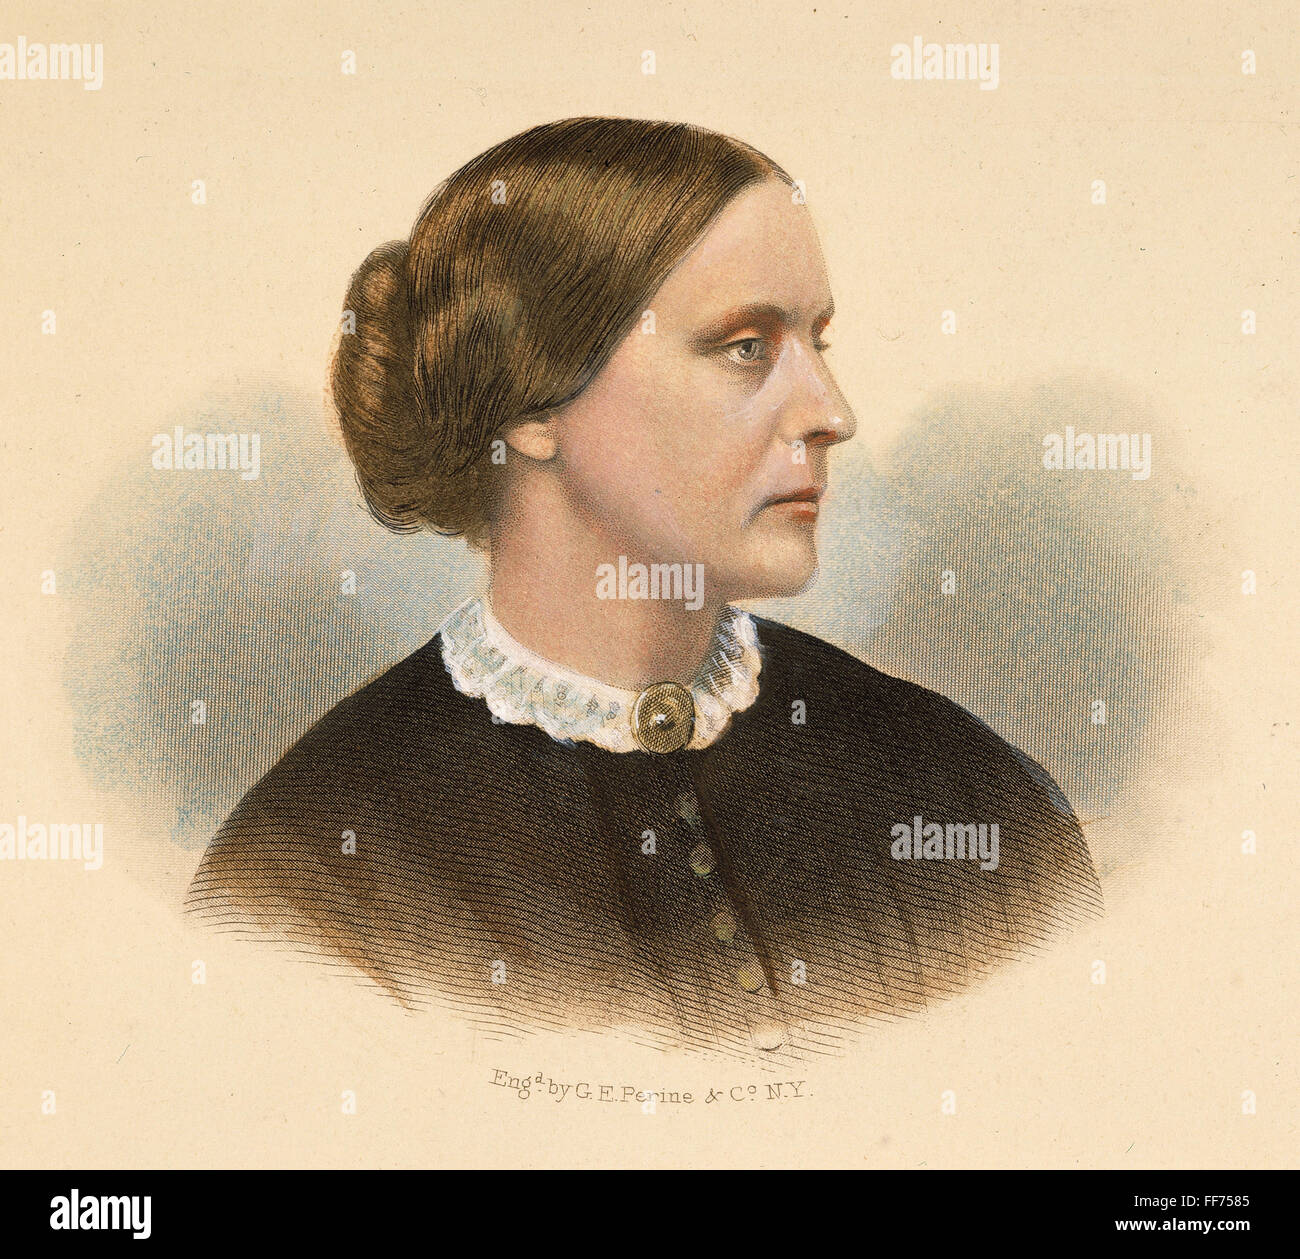 SUSAN B. ANTHONY (1820-1906). /NSteel incisione, xix secolo. Foto Stock